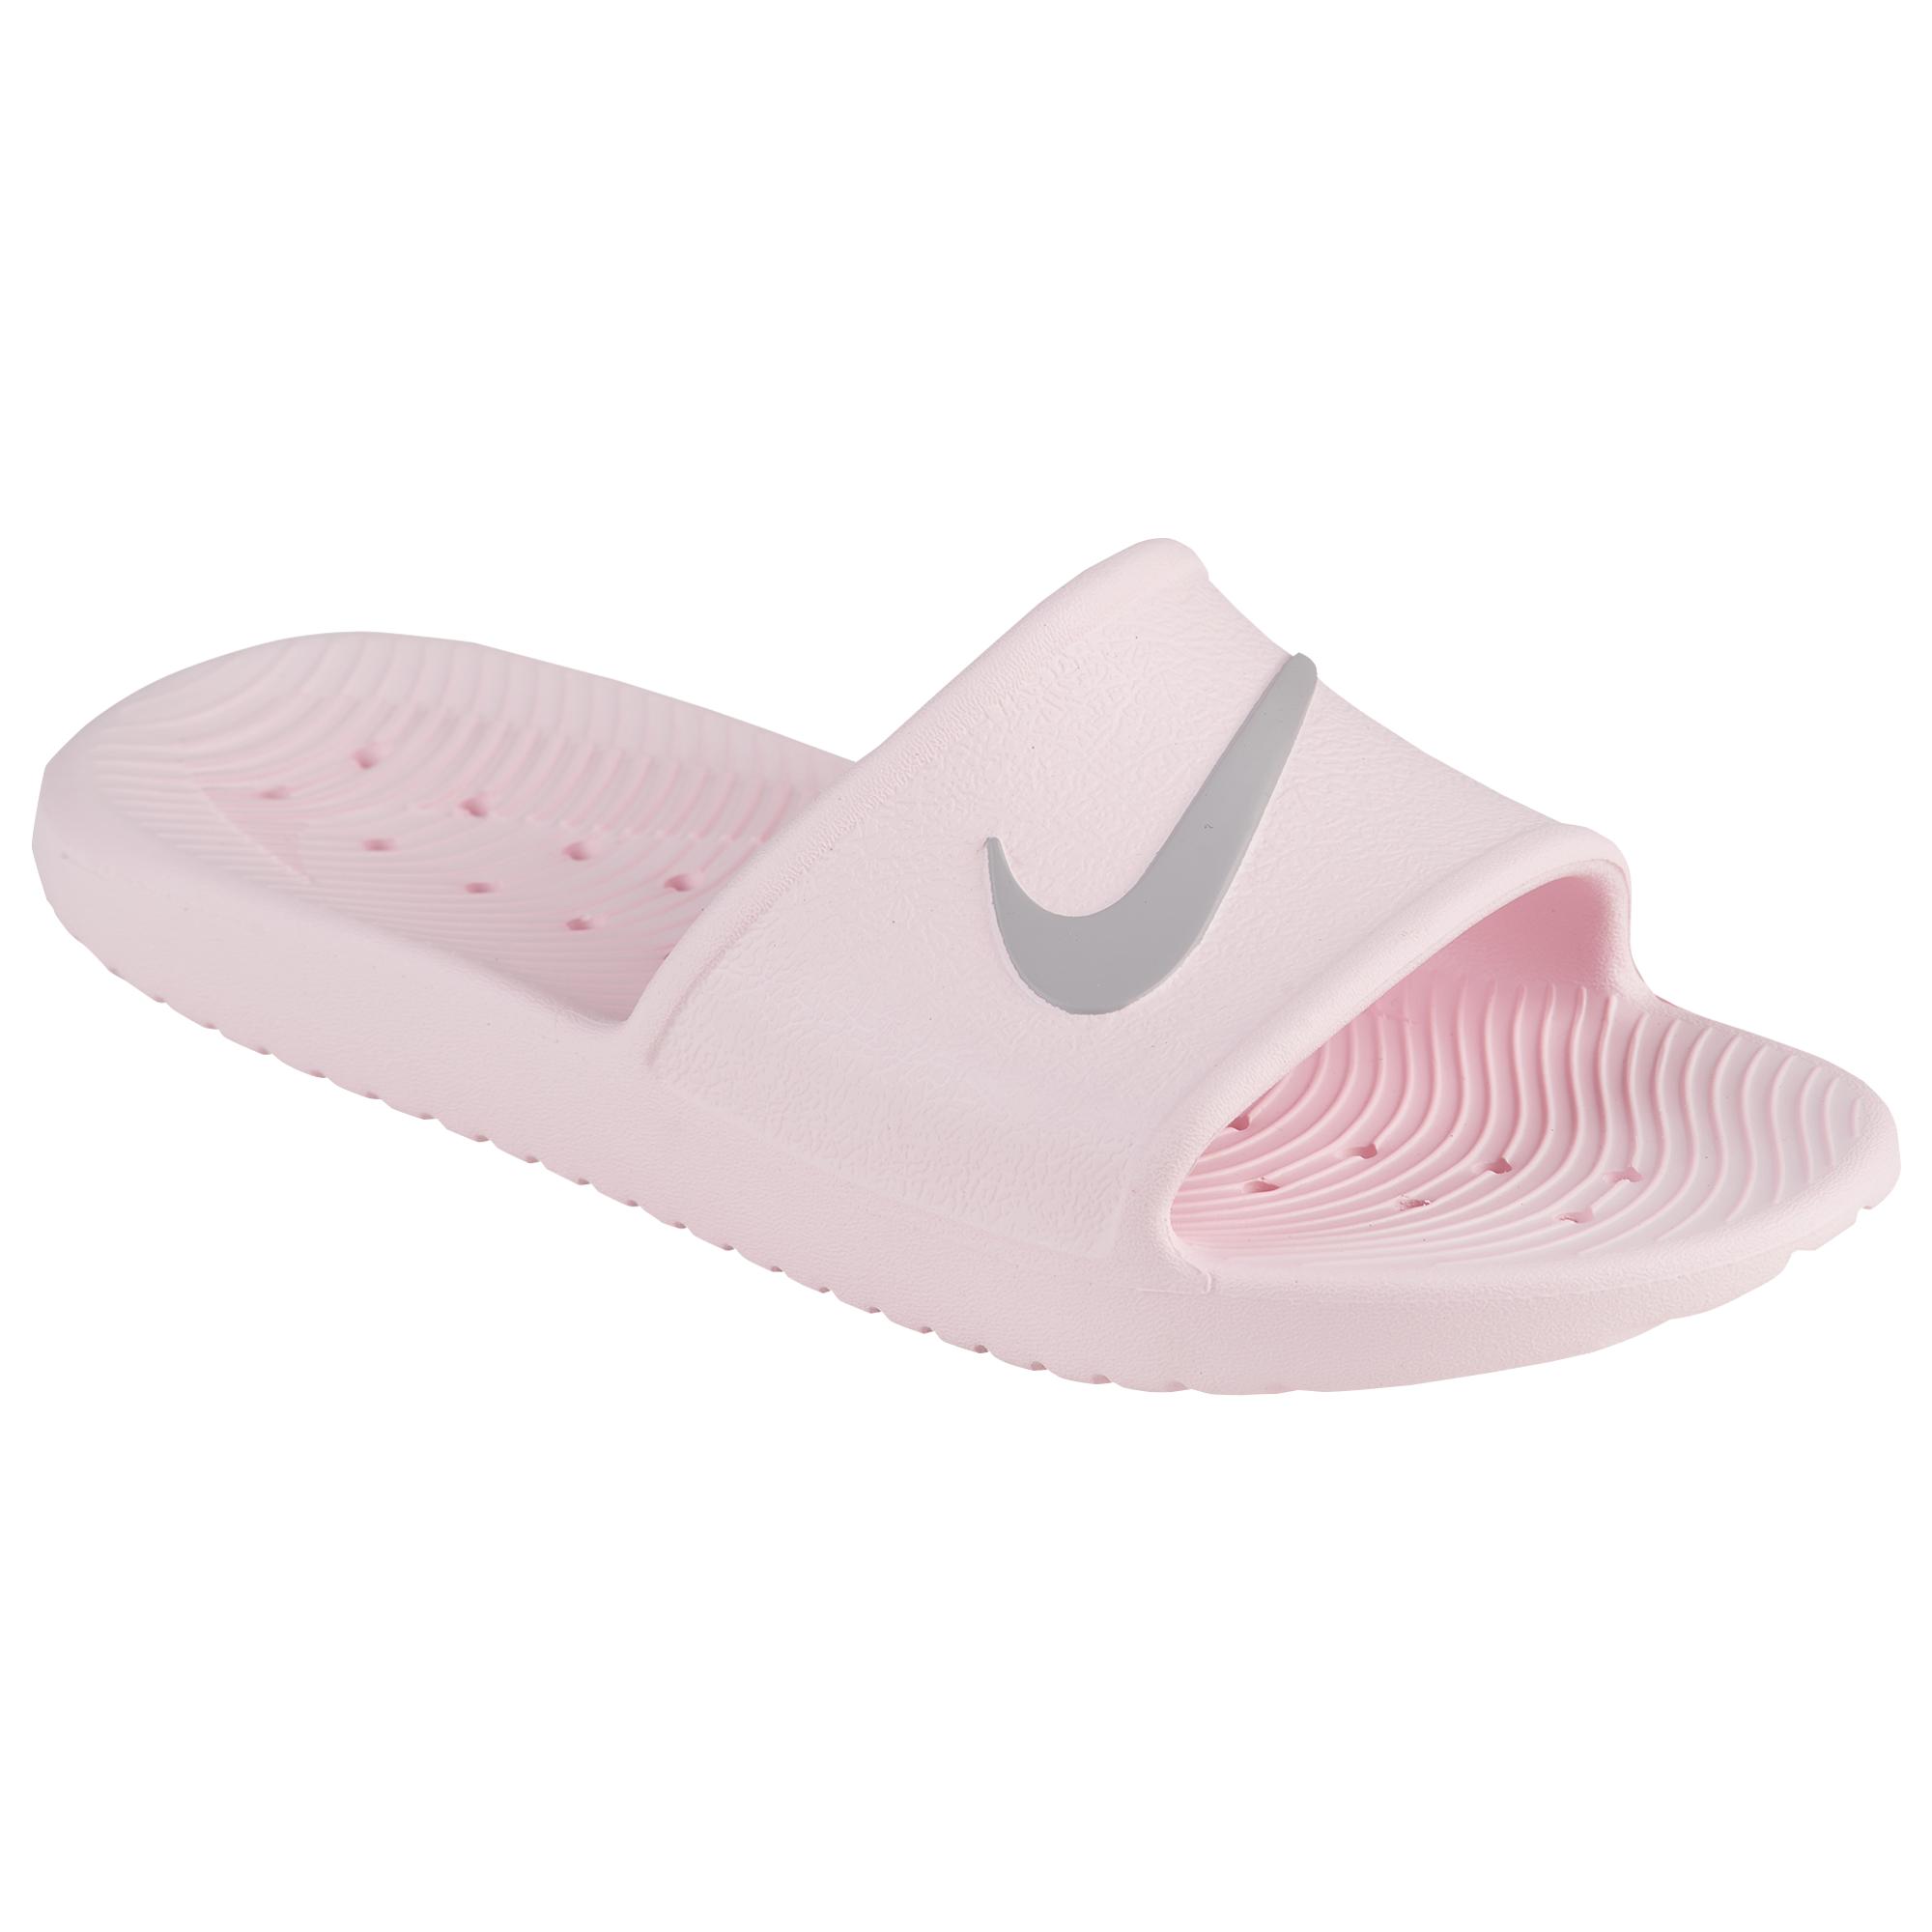 Nike Synthetic Kawa Shower Slide Shoes in Pink - Lyst